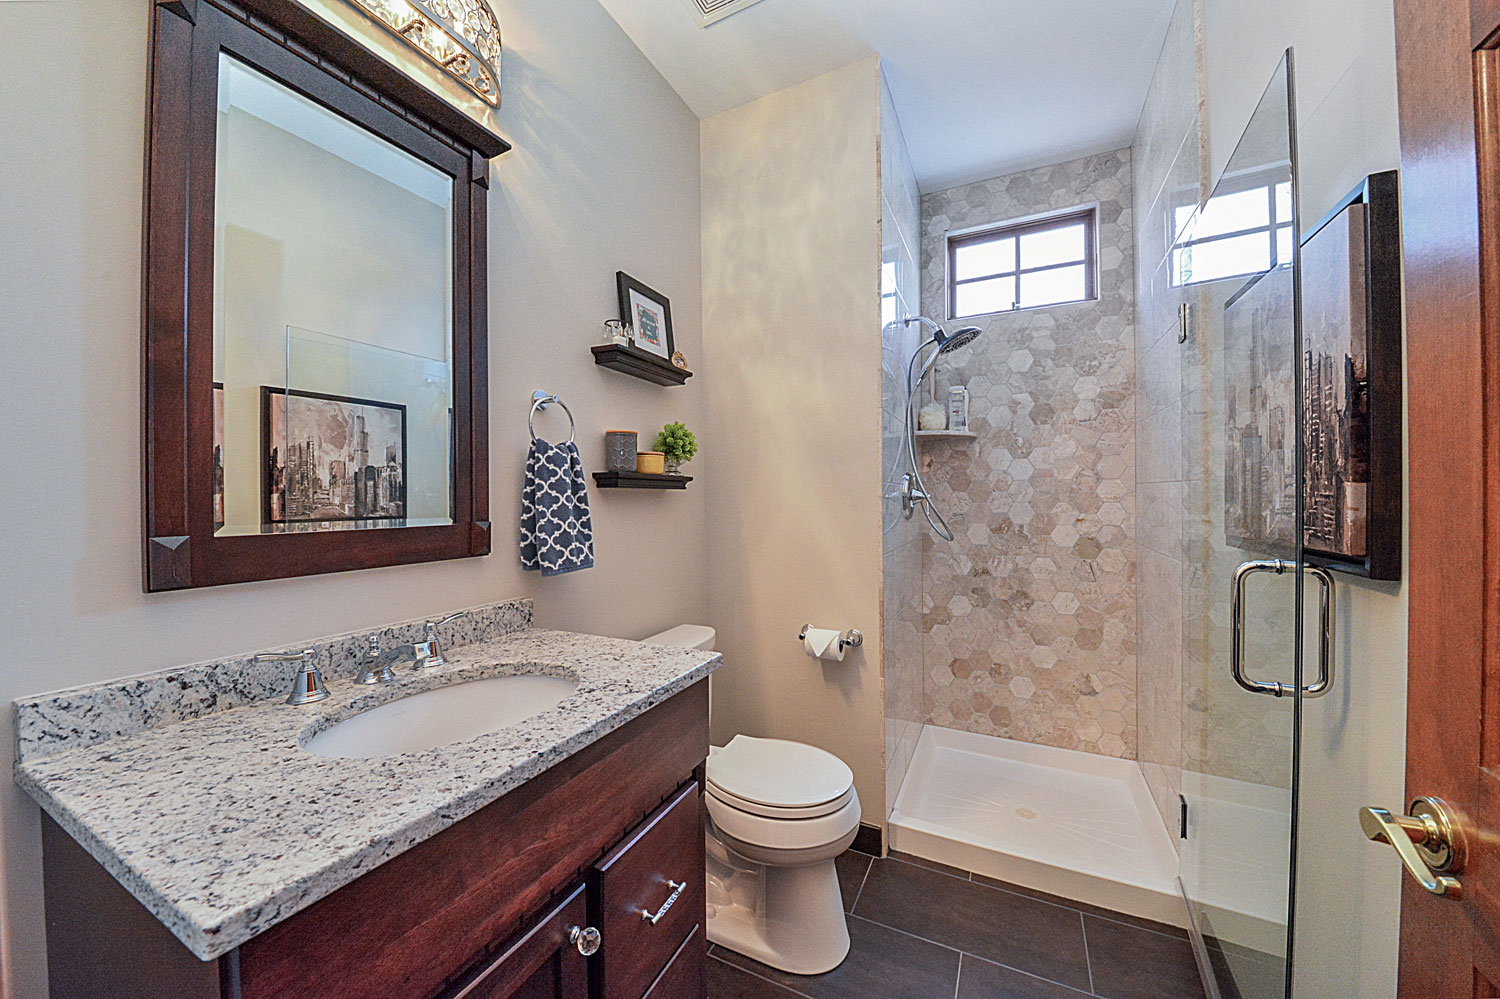 Patrick & Sharon's Bathroom Remodel Pictures | Luxury Home Remodeling